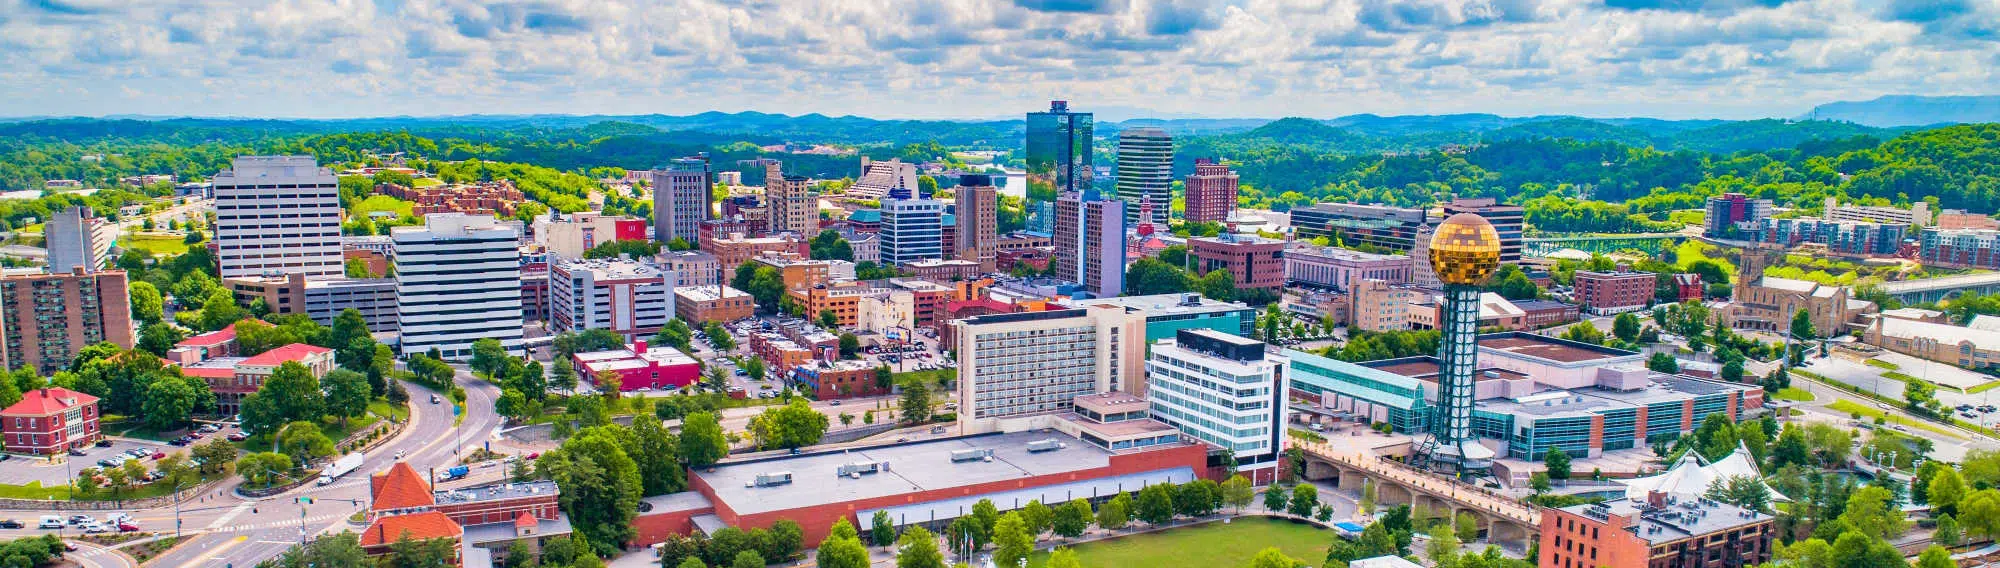 image of knoxville tn